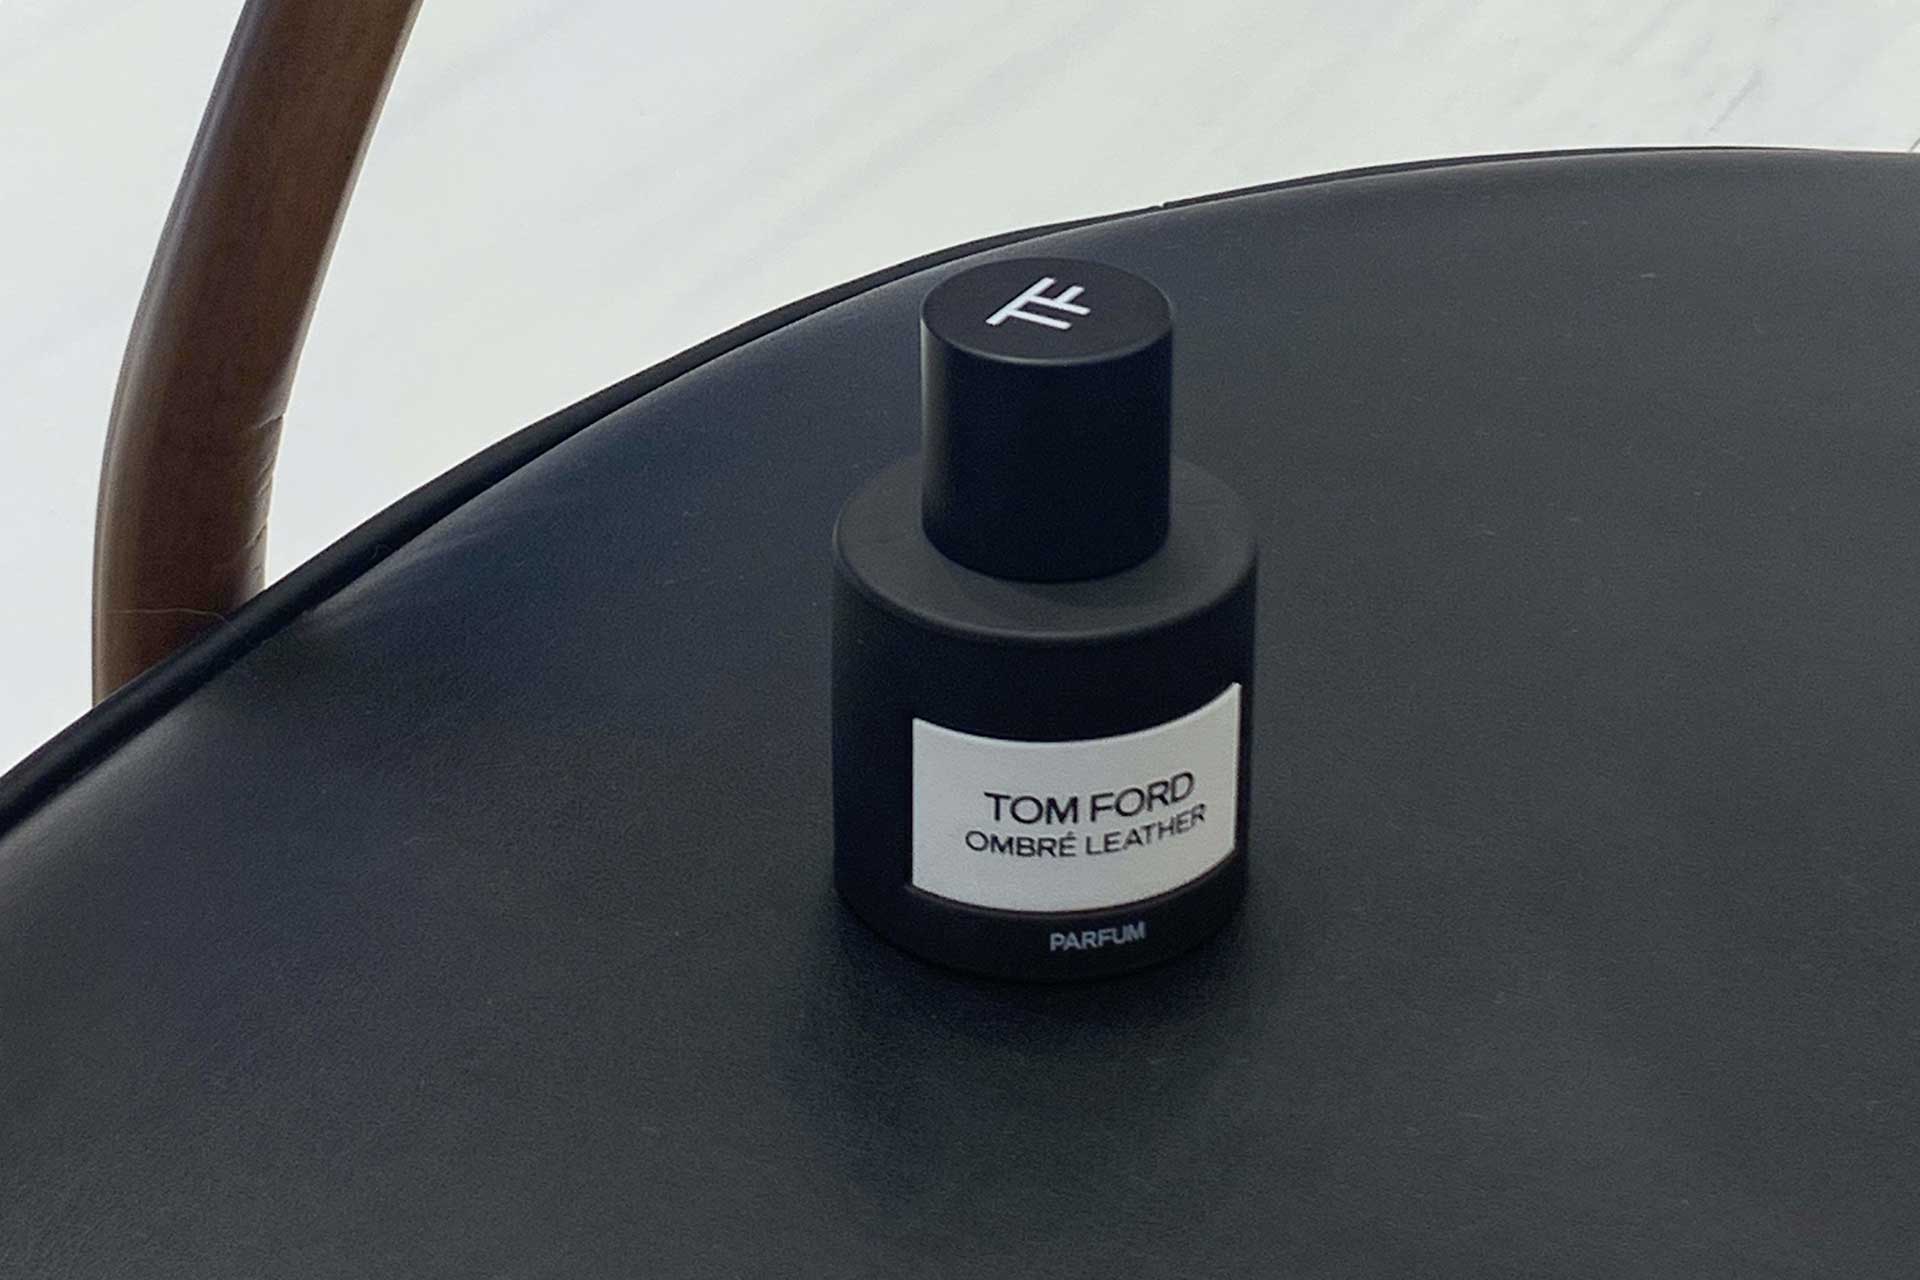 Ombre Leather TOM FORD - A Scent With A Western Heart